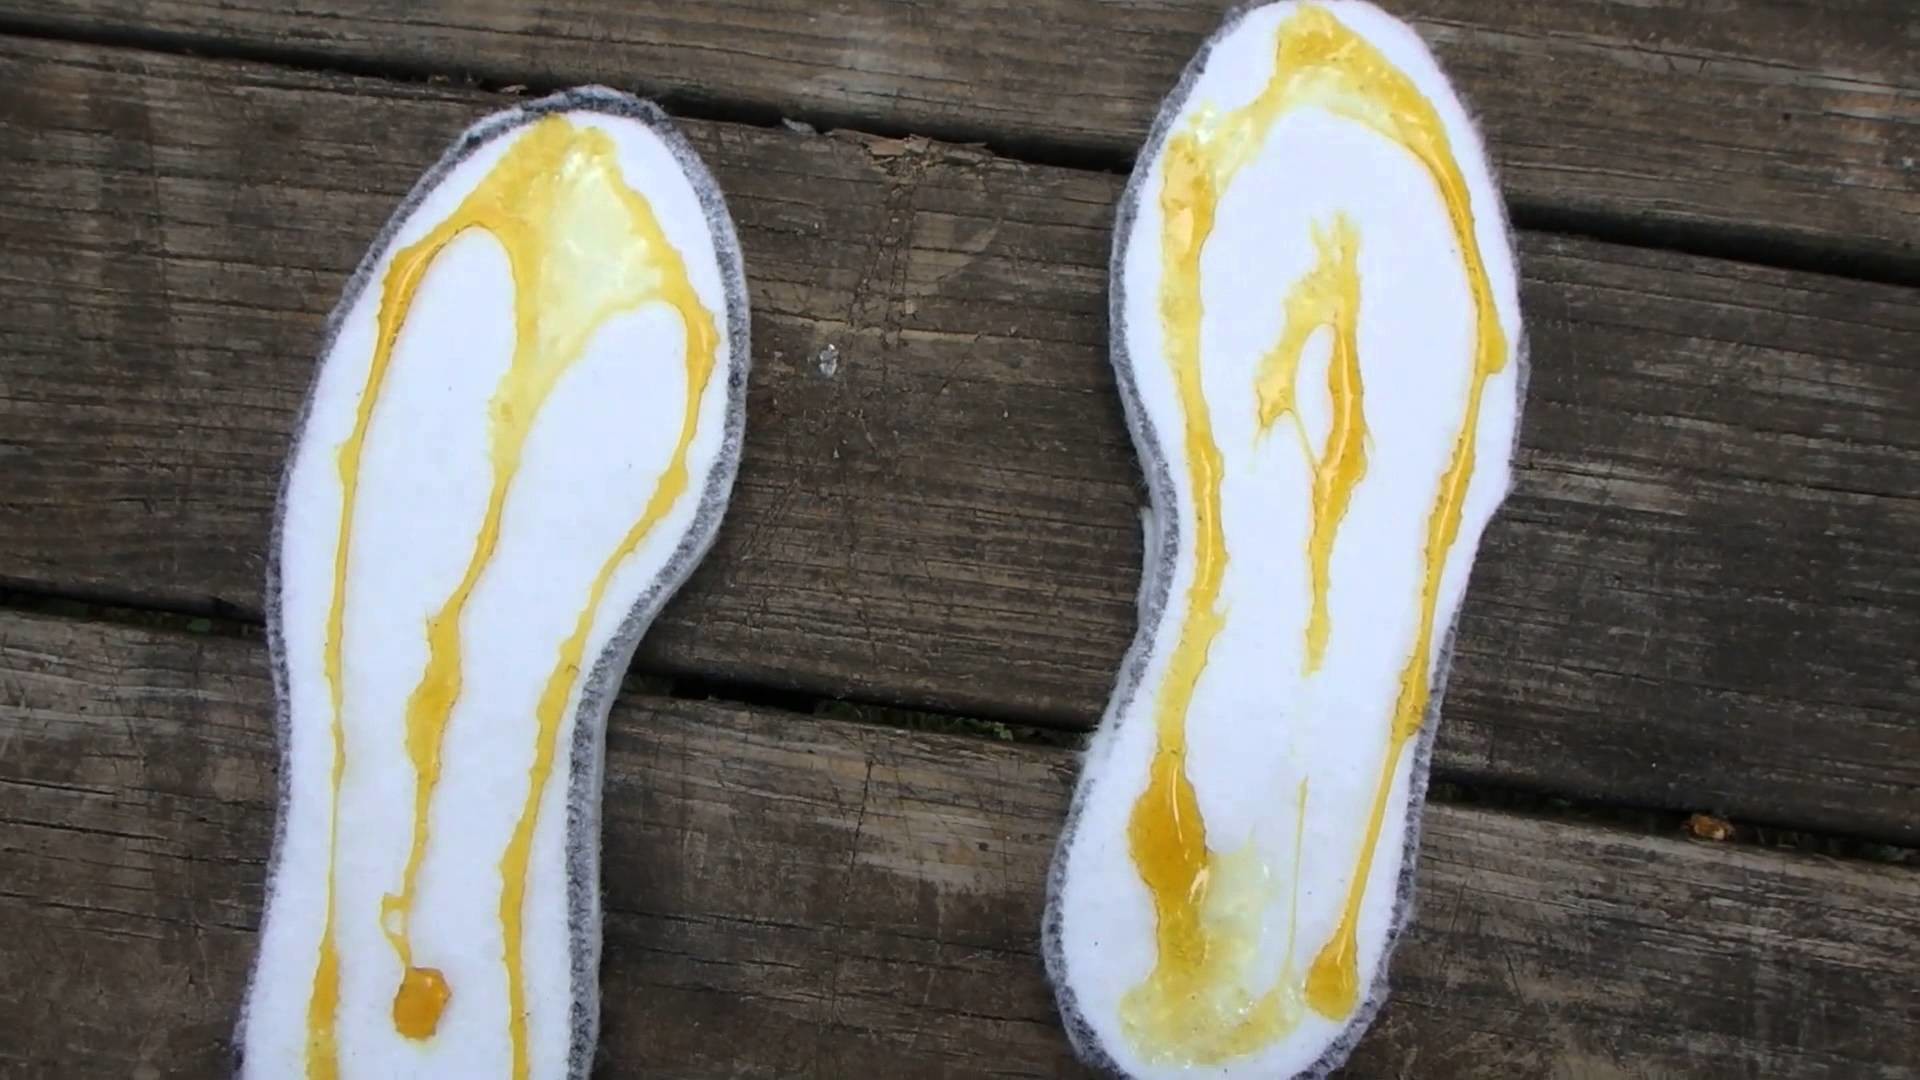 Water Hunting Tip! - How to make your own felt bottom boots